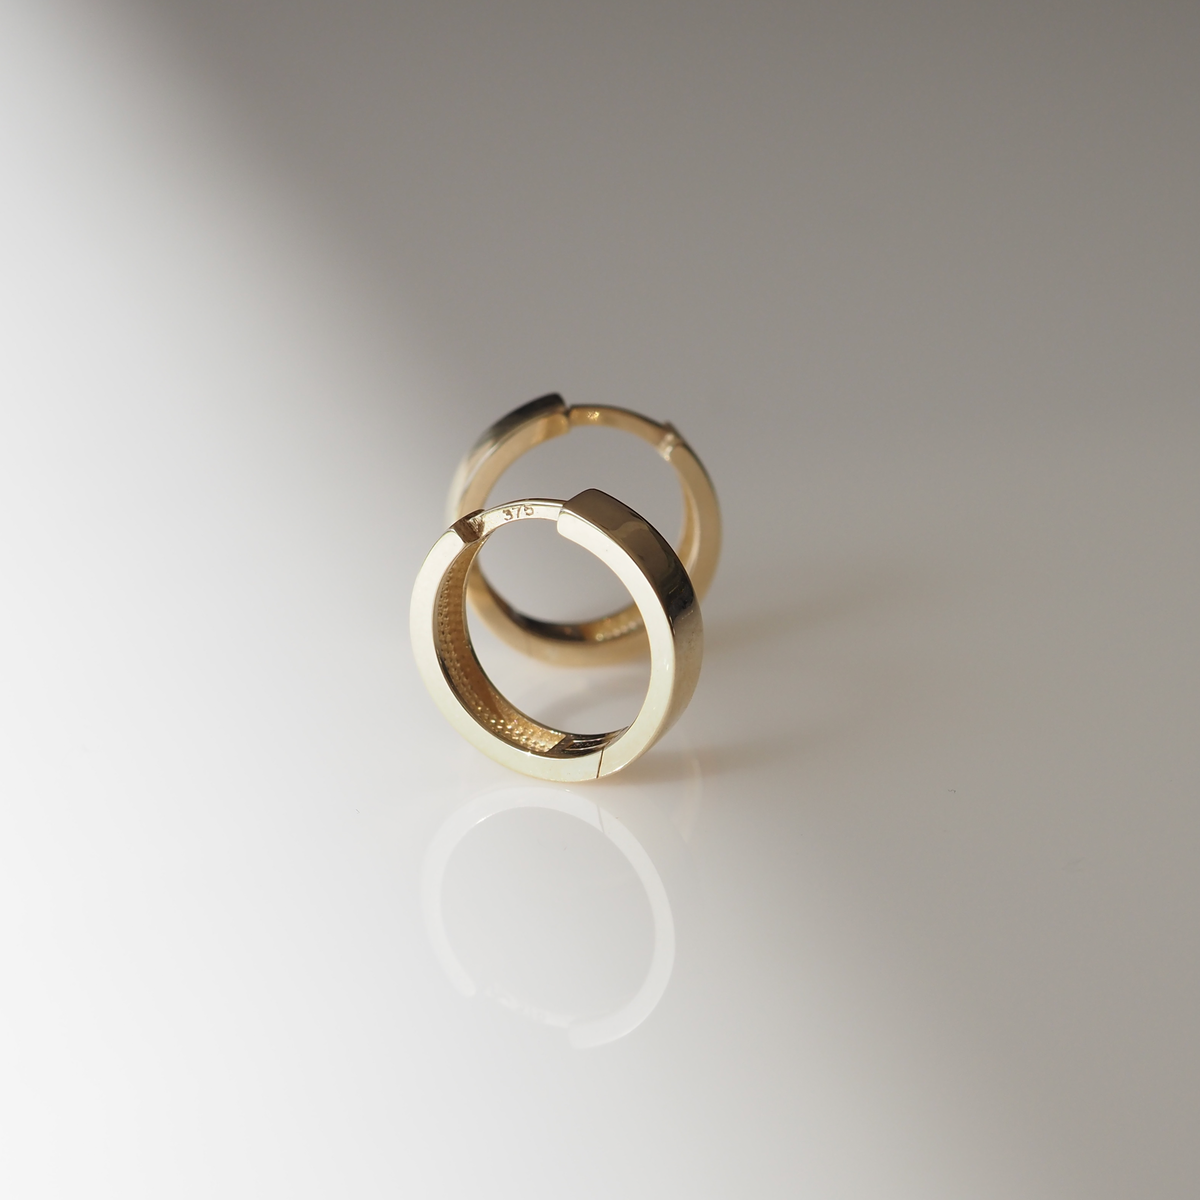 Solid Gold Huggies: Small 10mm hoop earrings made for everyday wear